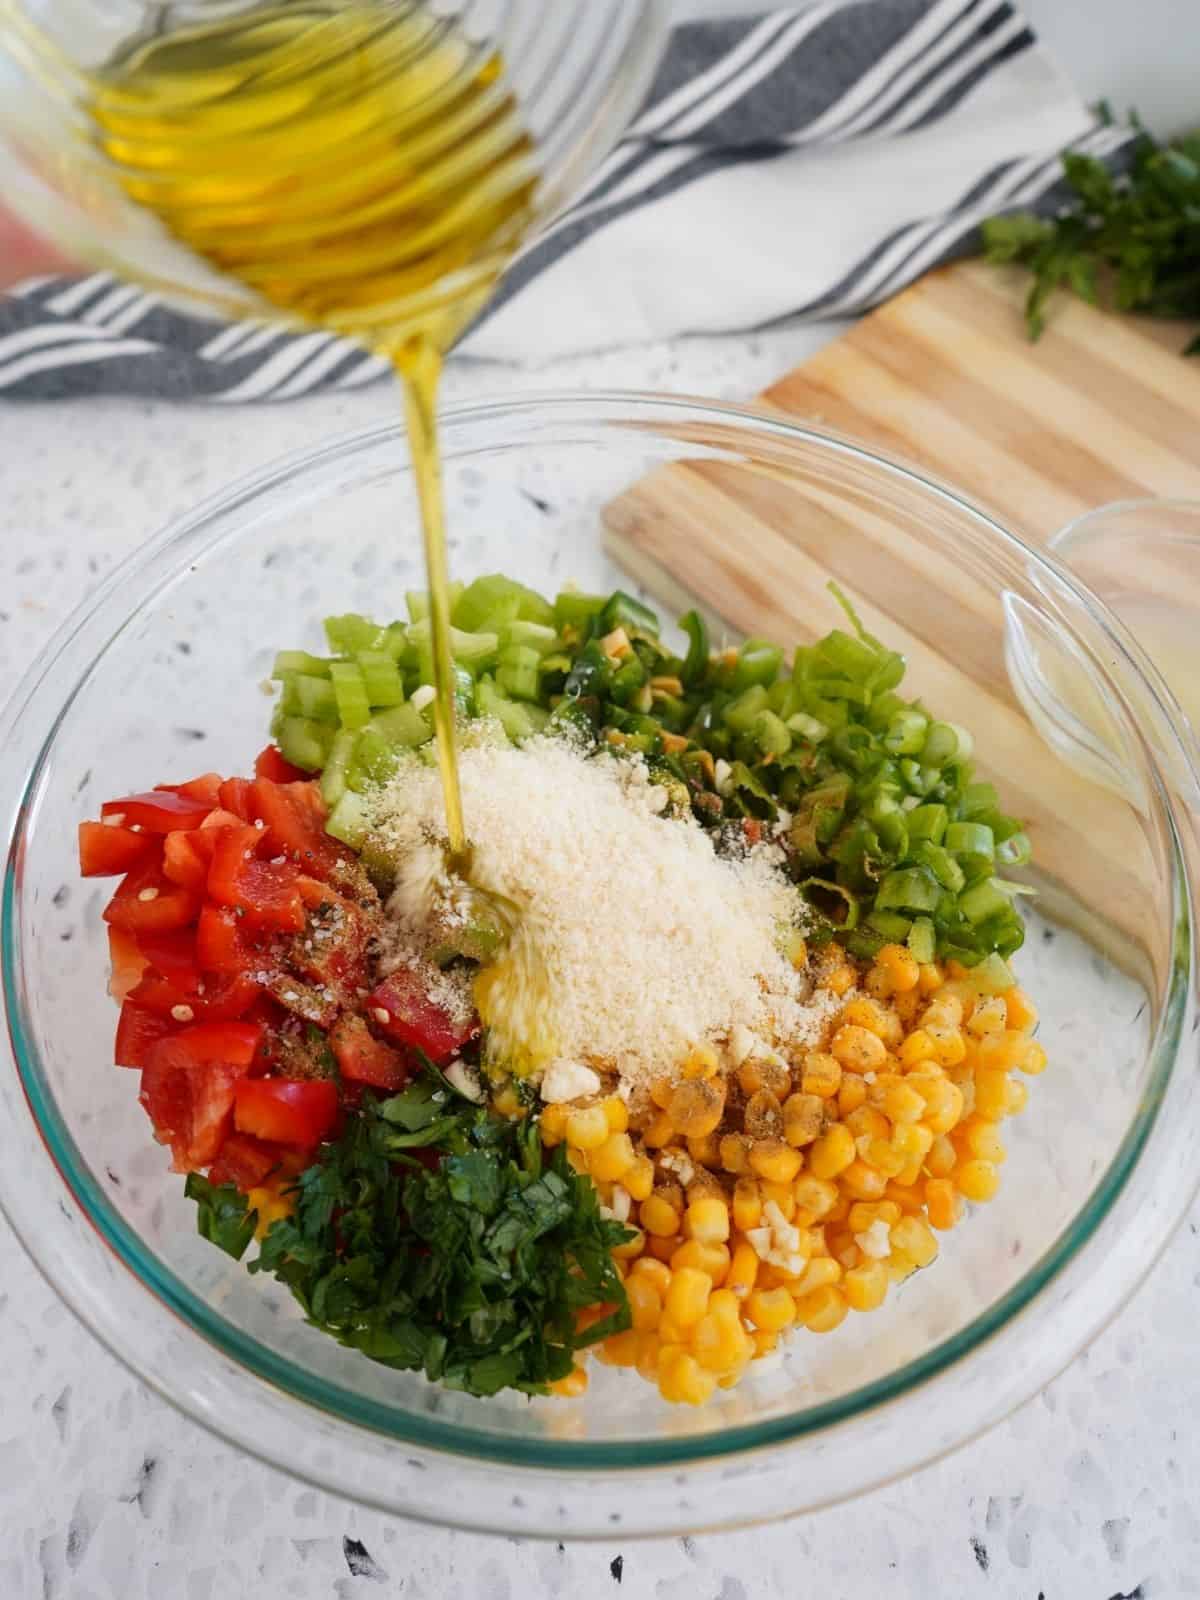 Add olive oil to bowl of corn salad ingredients.